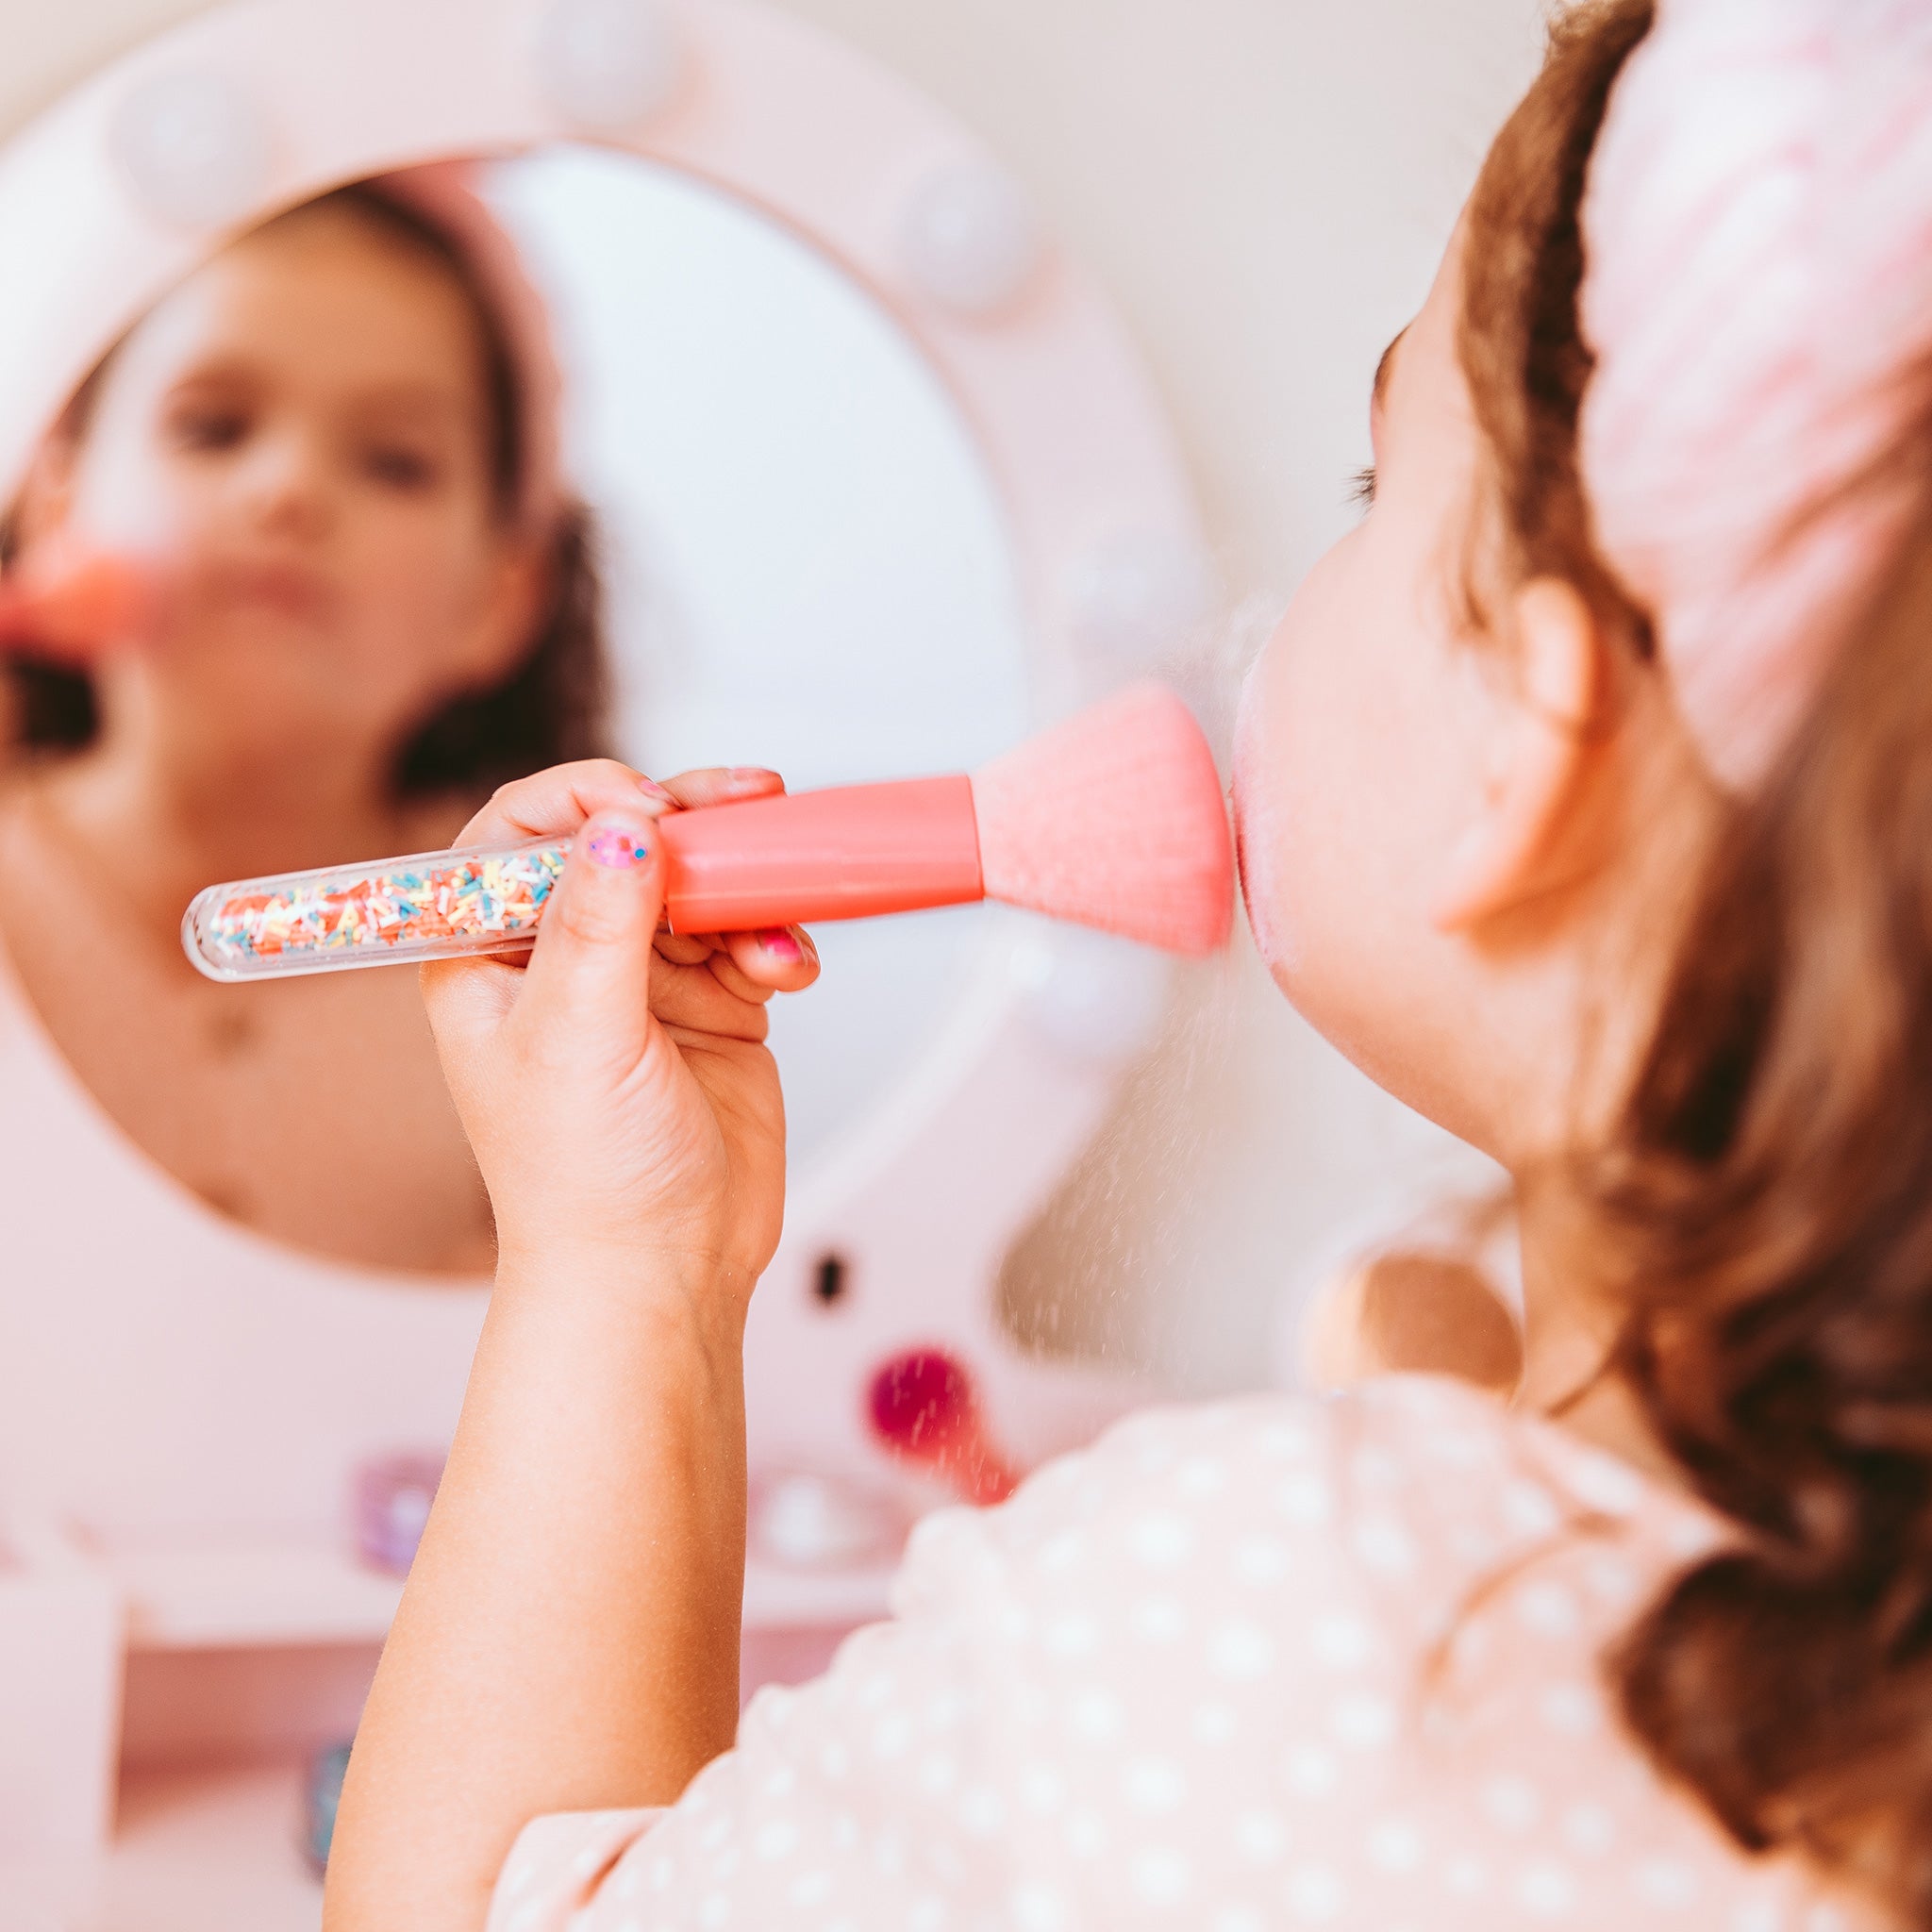 Oh-Flossy-Kids-Natural-Makeup-Sprinkle-brushes-and-makeup